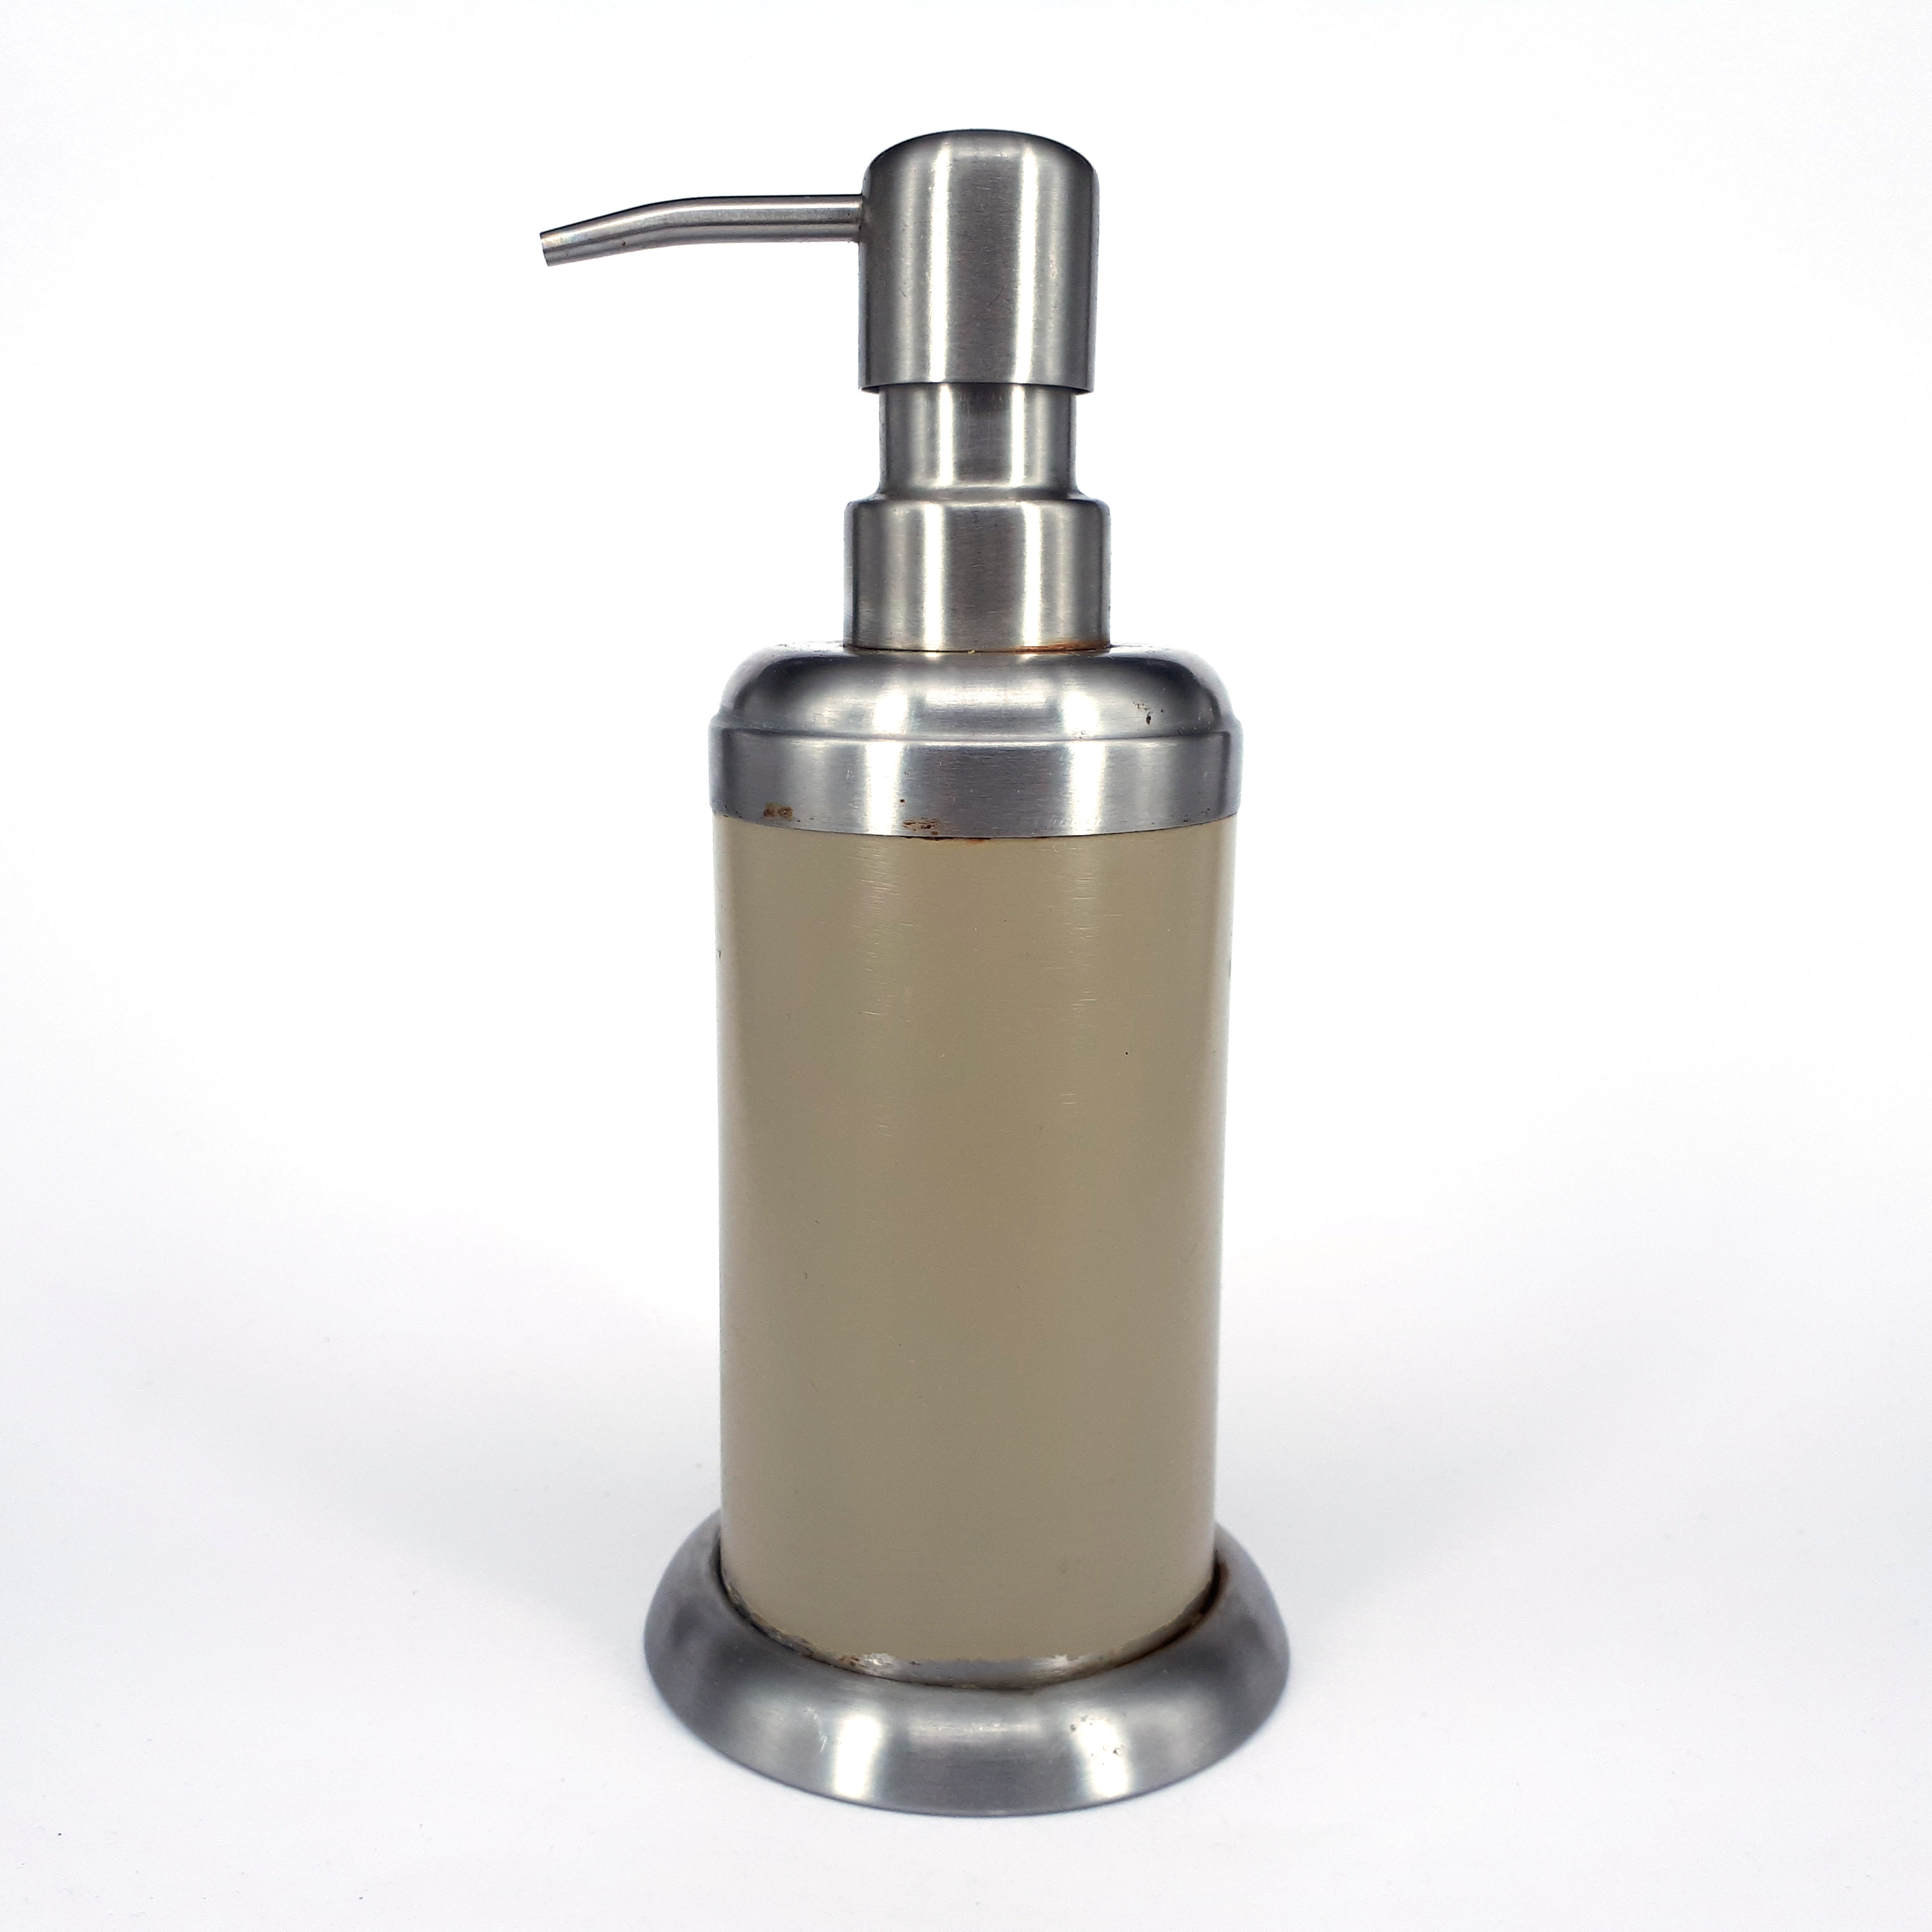 Soap Flakes bar soap dispensers lets you use bar soap just as